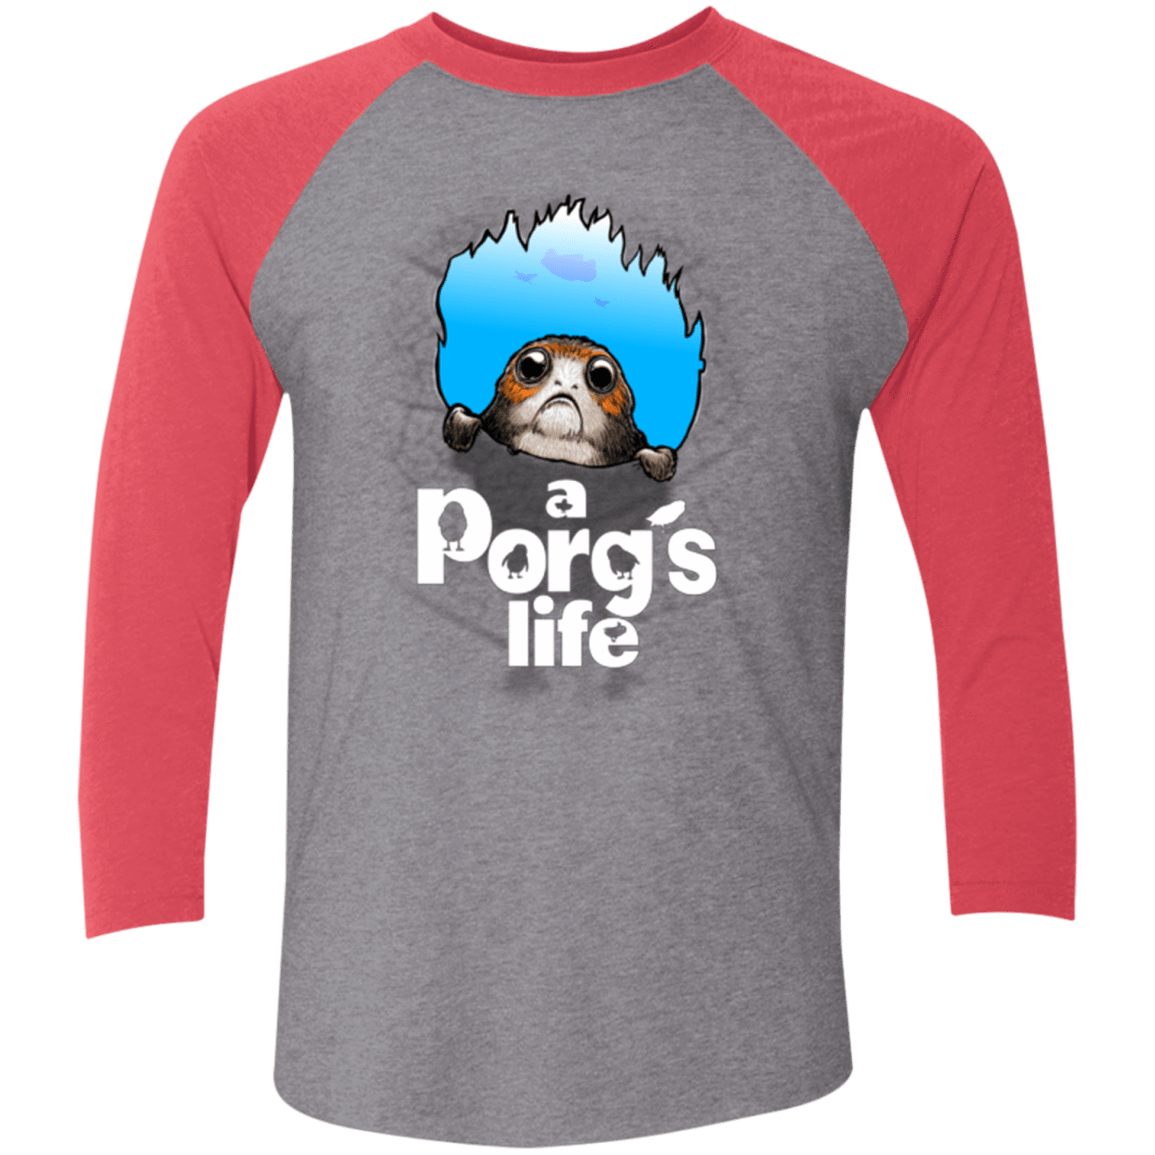 T-Shirts Premium Heather/ Vintage Red / X-Small A Porgs Life Men's Triblend 3/4 Sleeve